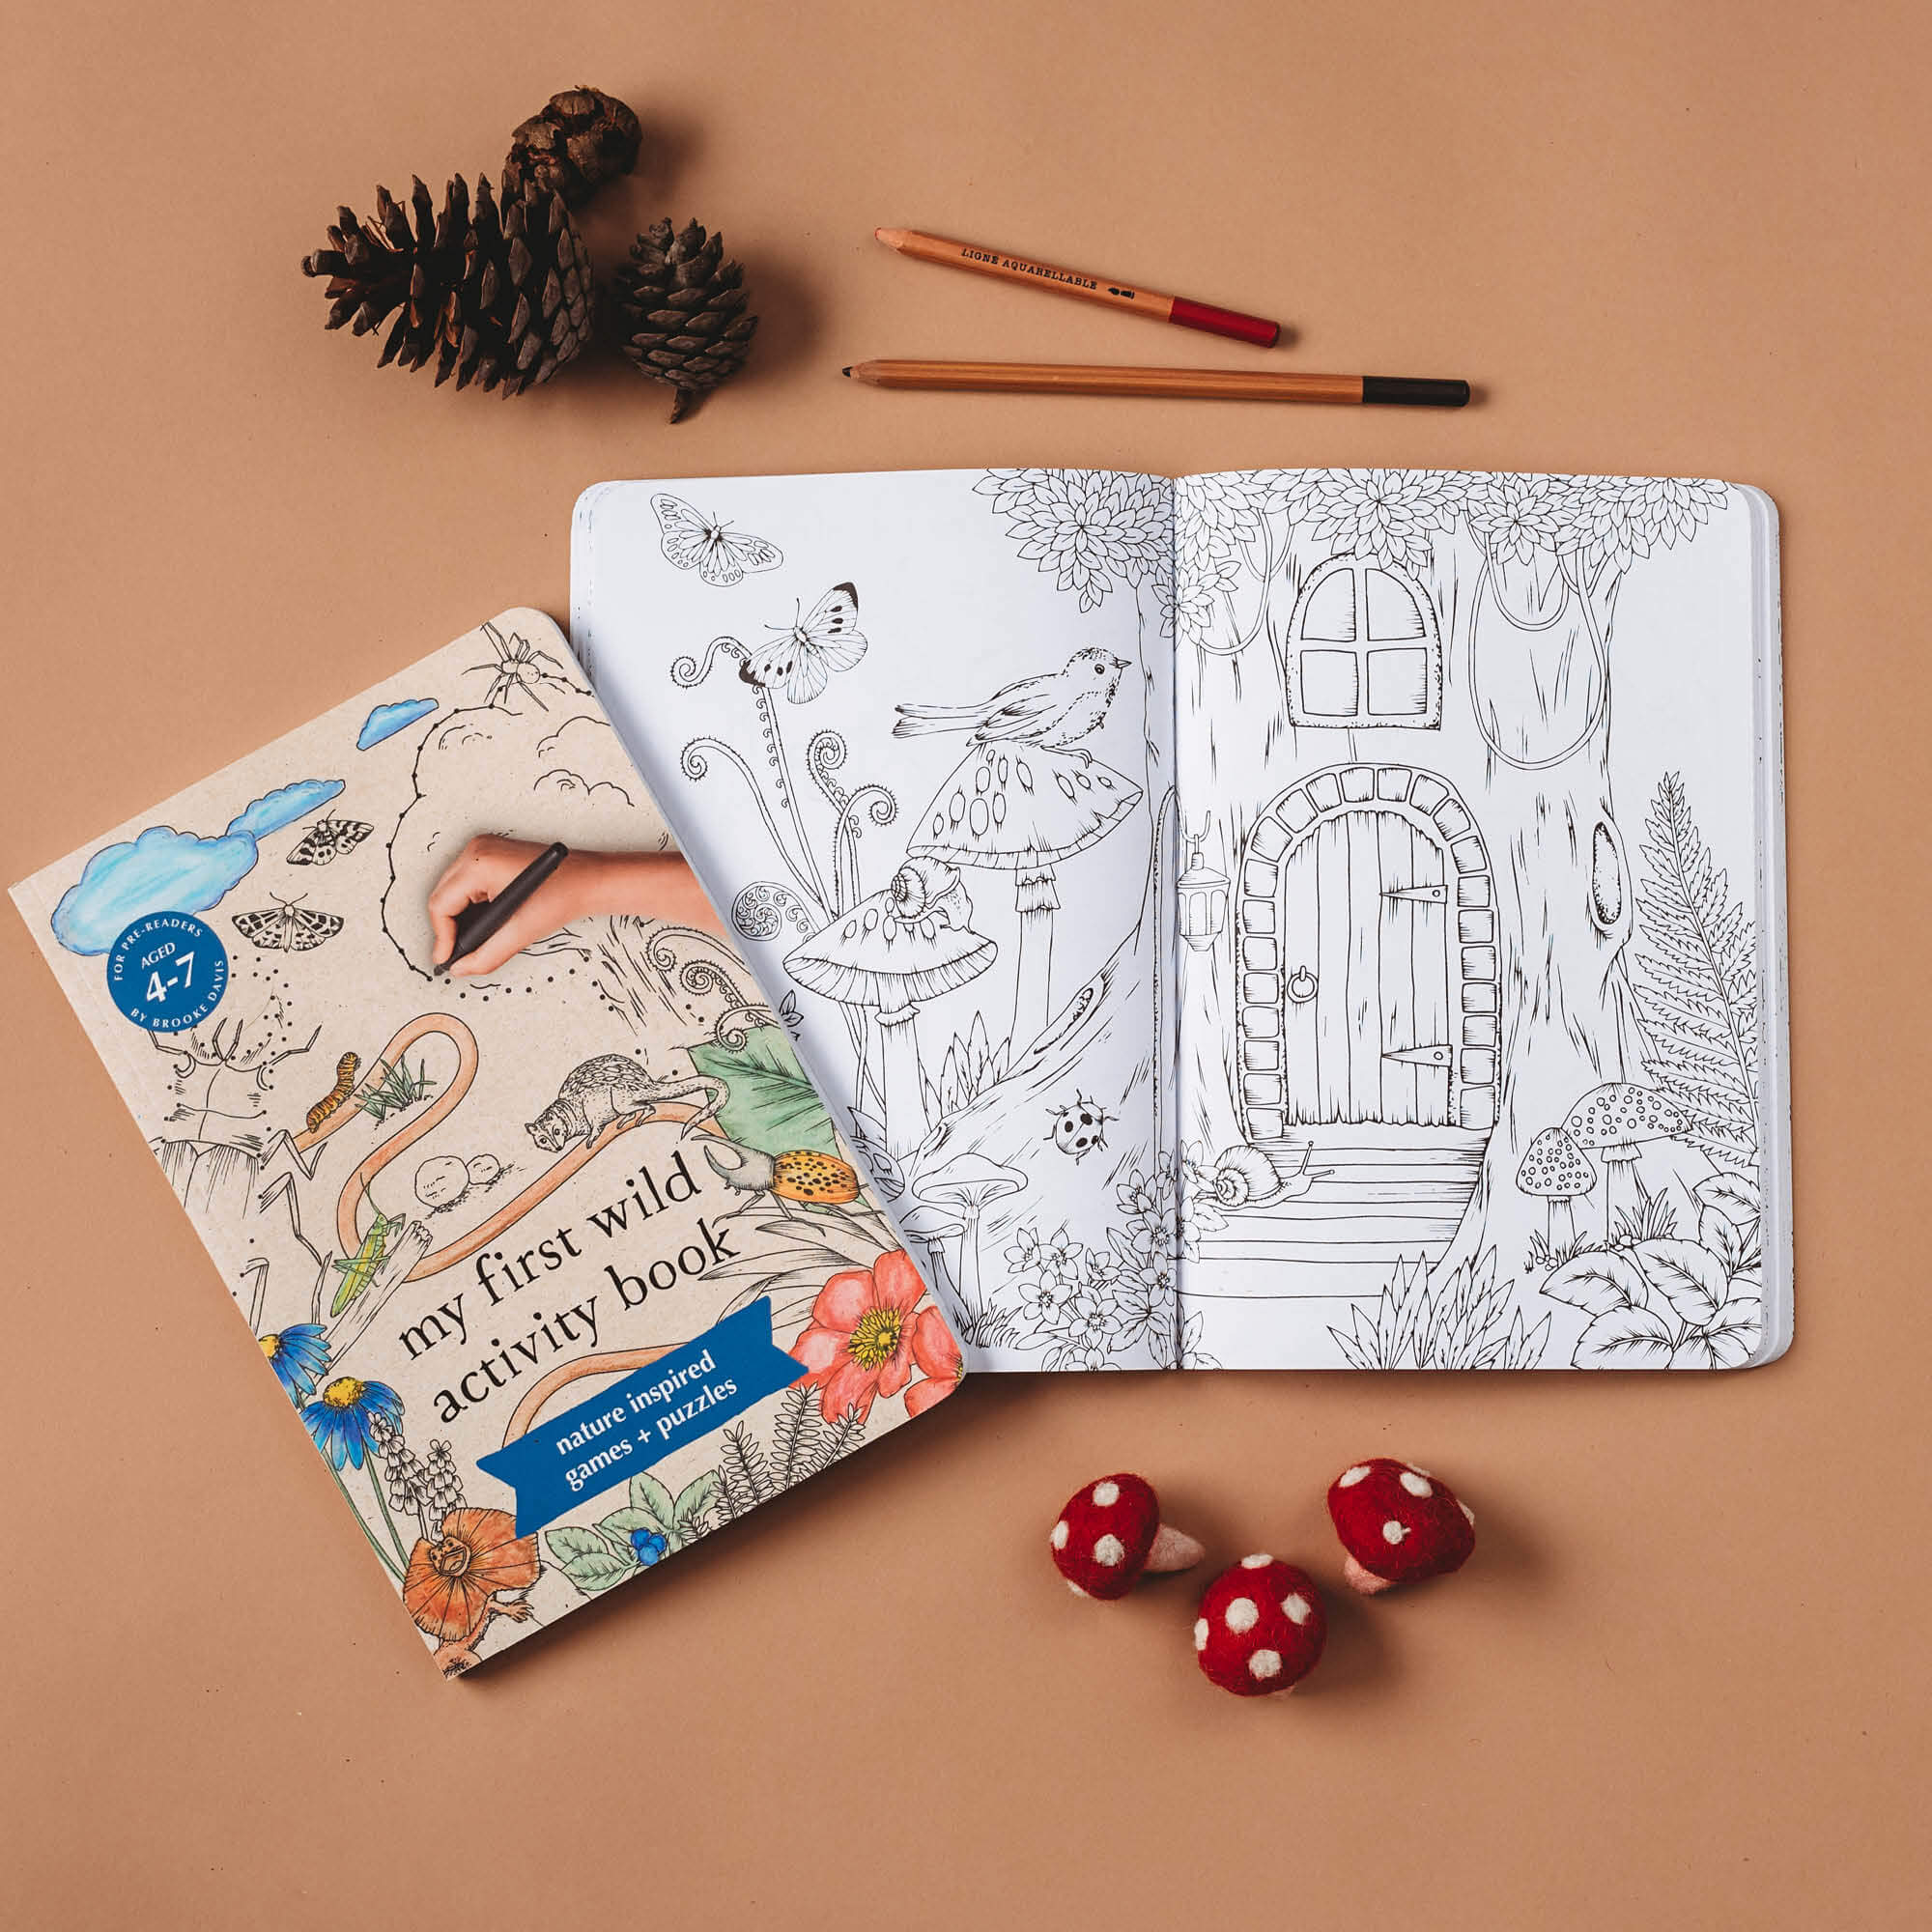 Pages showing a fairy door colouring in from the book, My First Wild Activity Book for kids 4-7 years who are learning to read, featuring nature inspired games and puzzles.